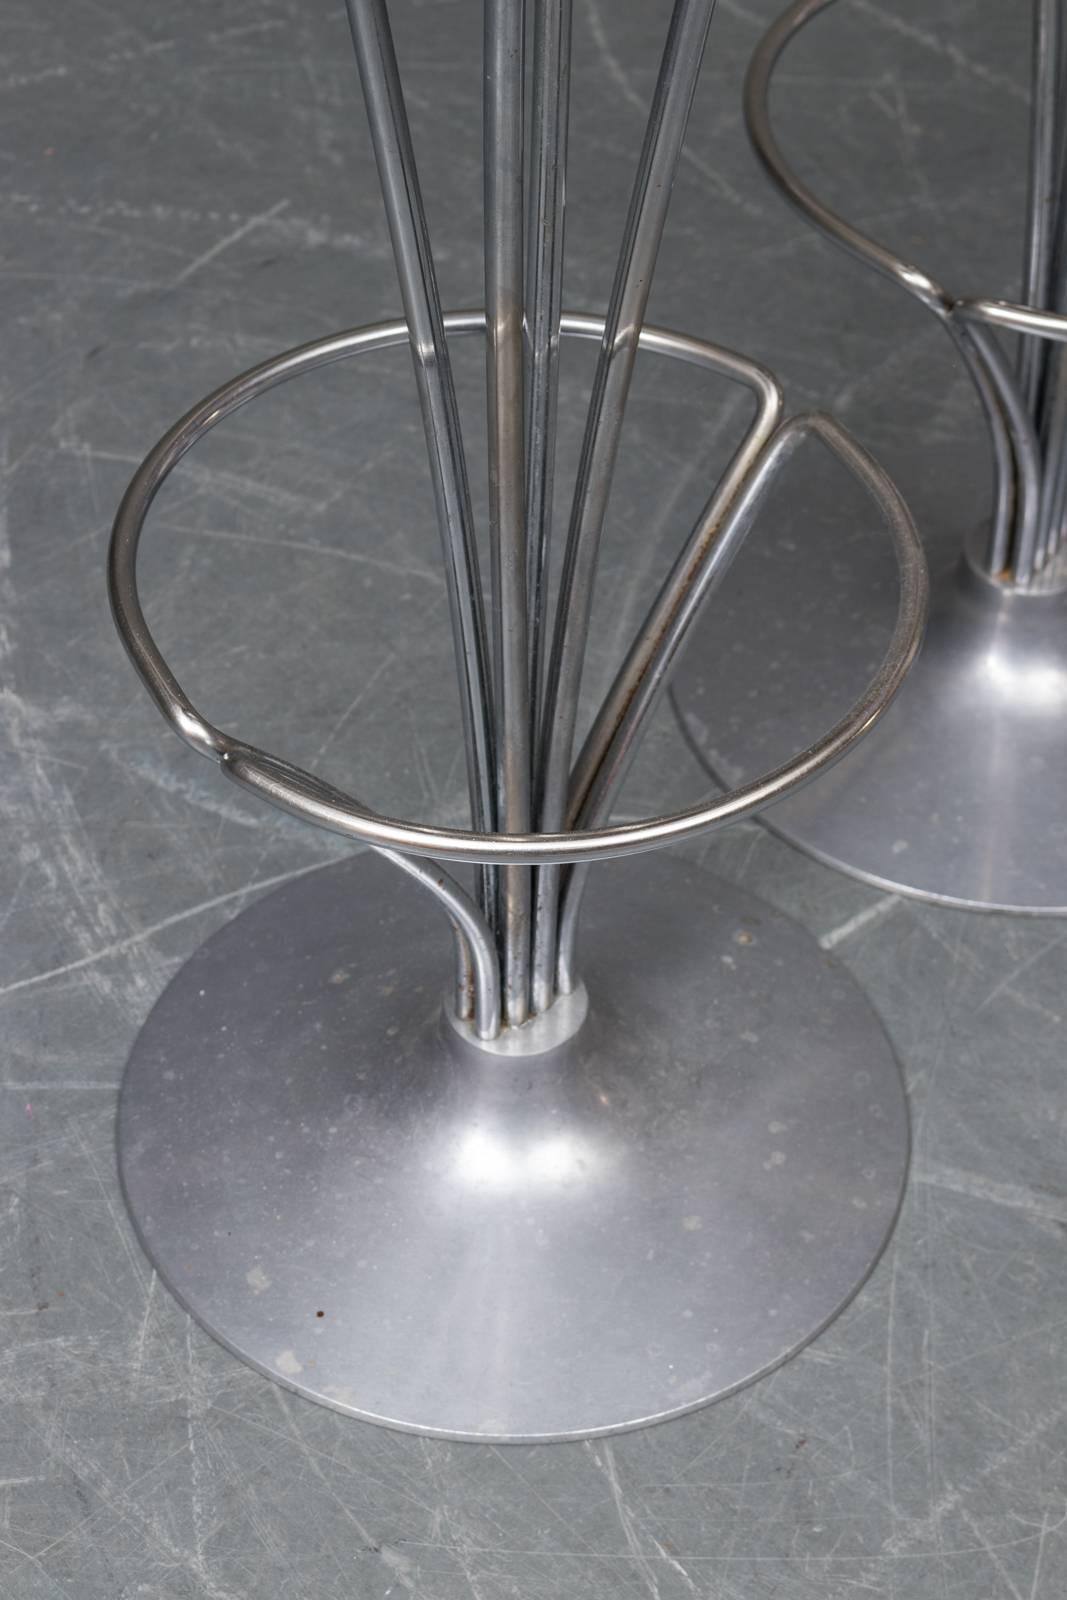 Set of three Danish Modern, polished aluminium bar stools, designed by Piet Hein and manufactured by Fritz Hansen in 1984, model 9511. Frames are in good condition, some wear to fabric tops consistent with age and use.